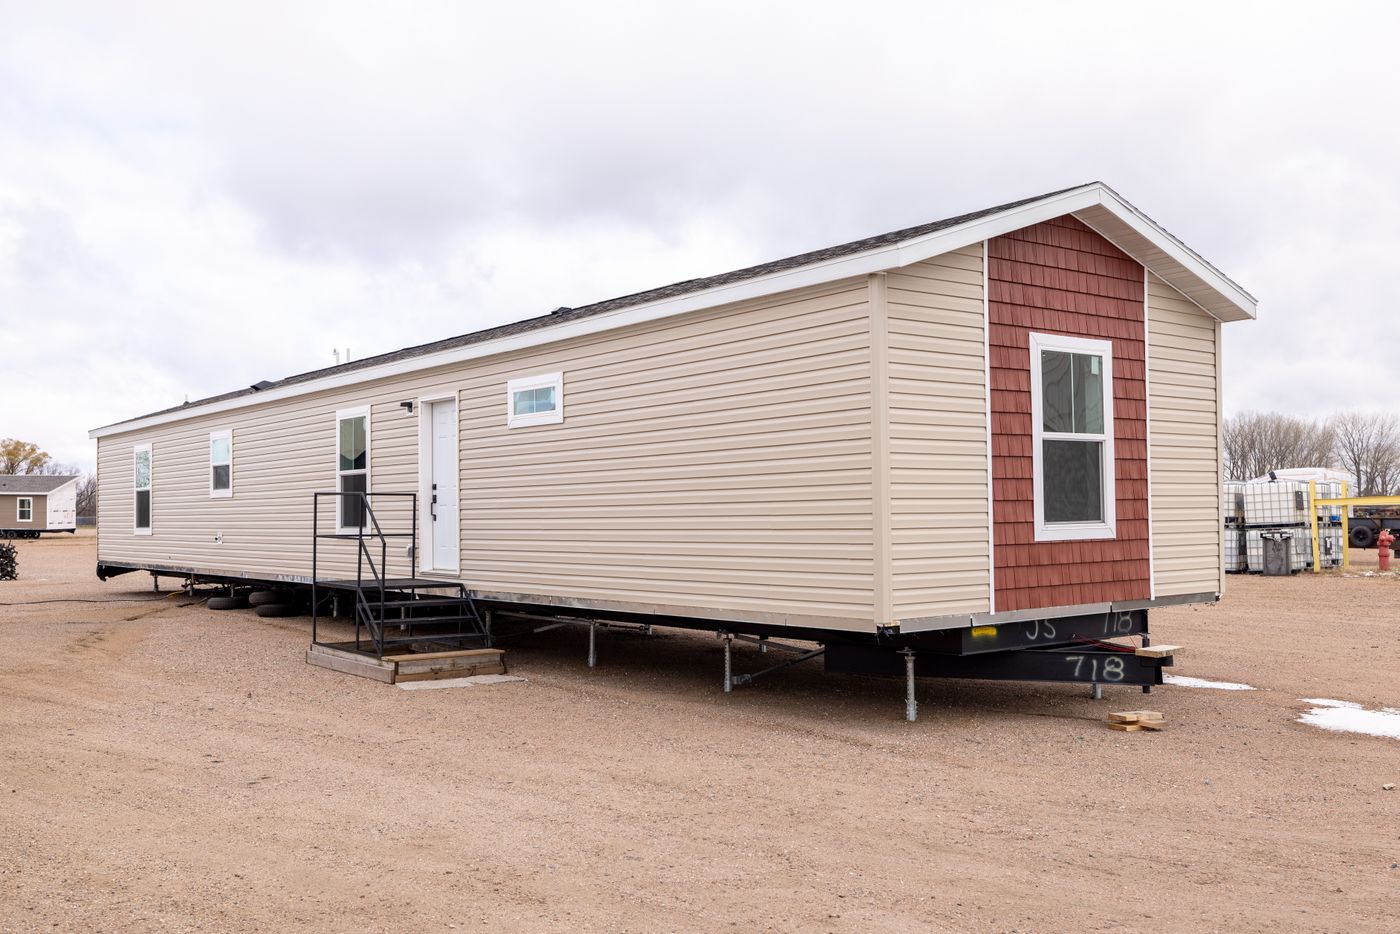 The RAMSEY 216-2 Exterior. This Manufactured Mobile Home features 3 bedrooms and 2 baths.